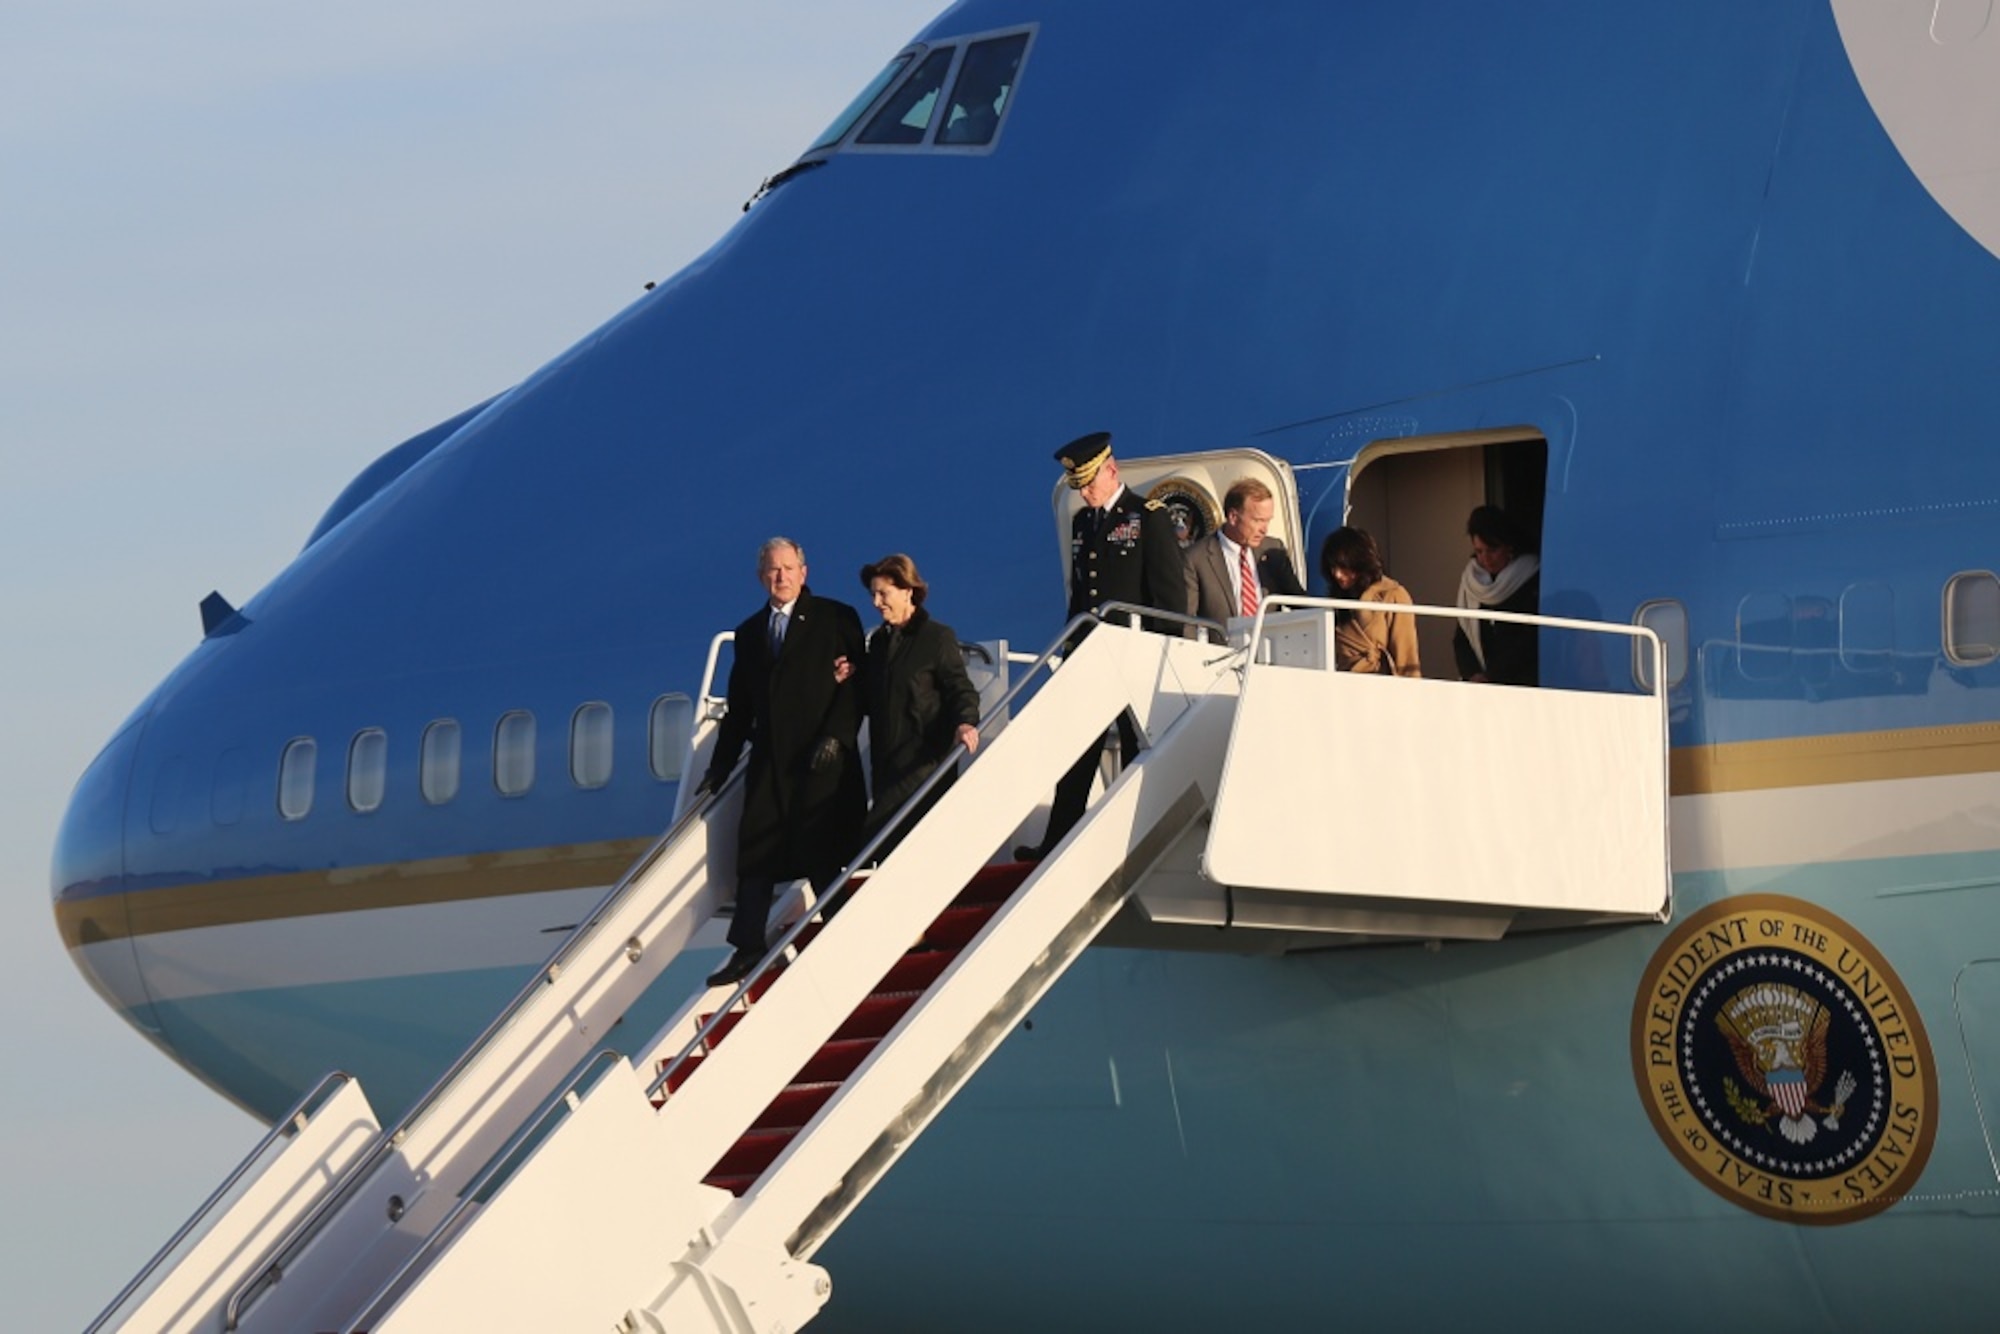 Bush family arrives for state funeral aboard Air Force One.